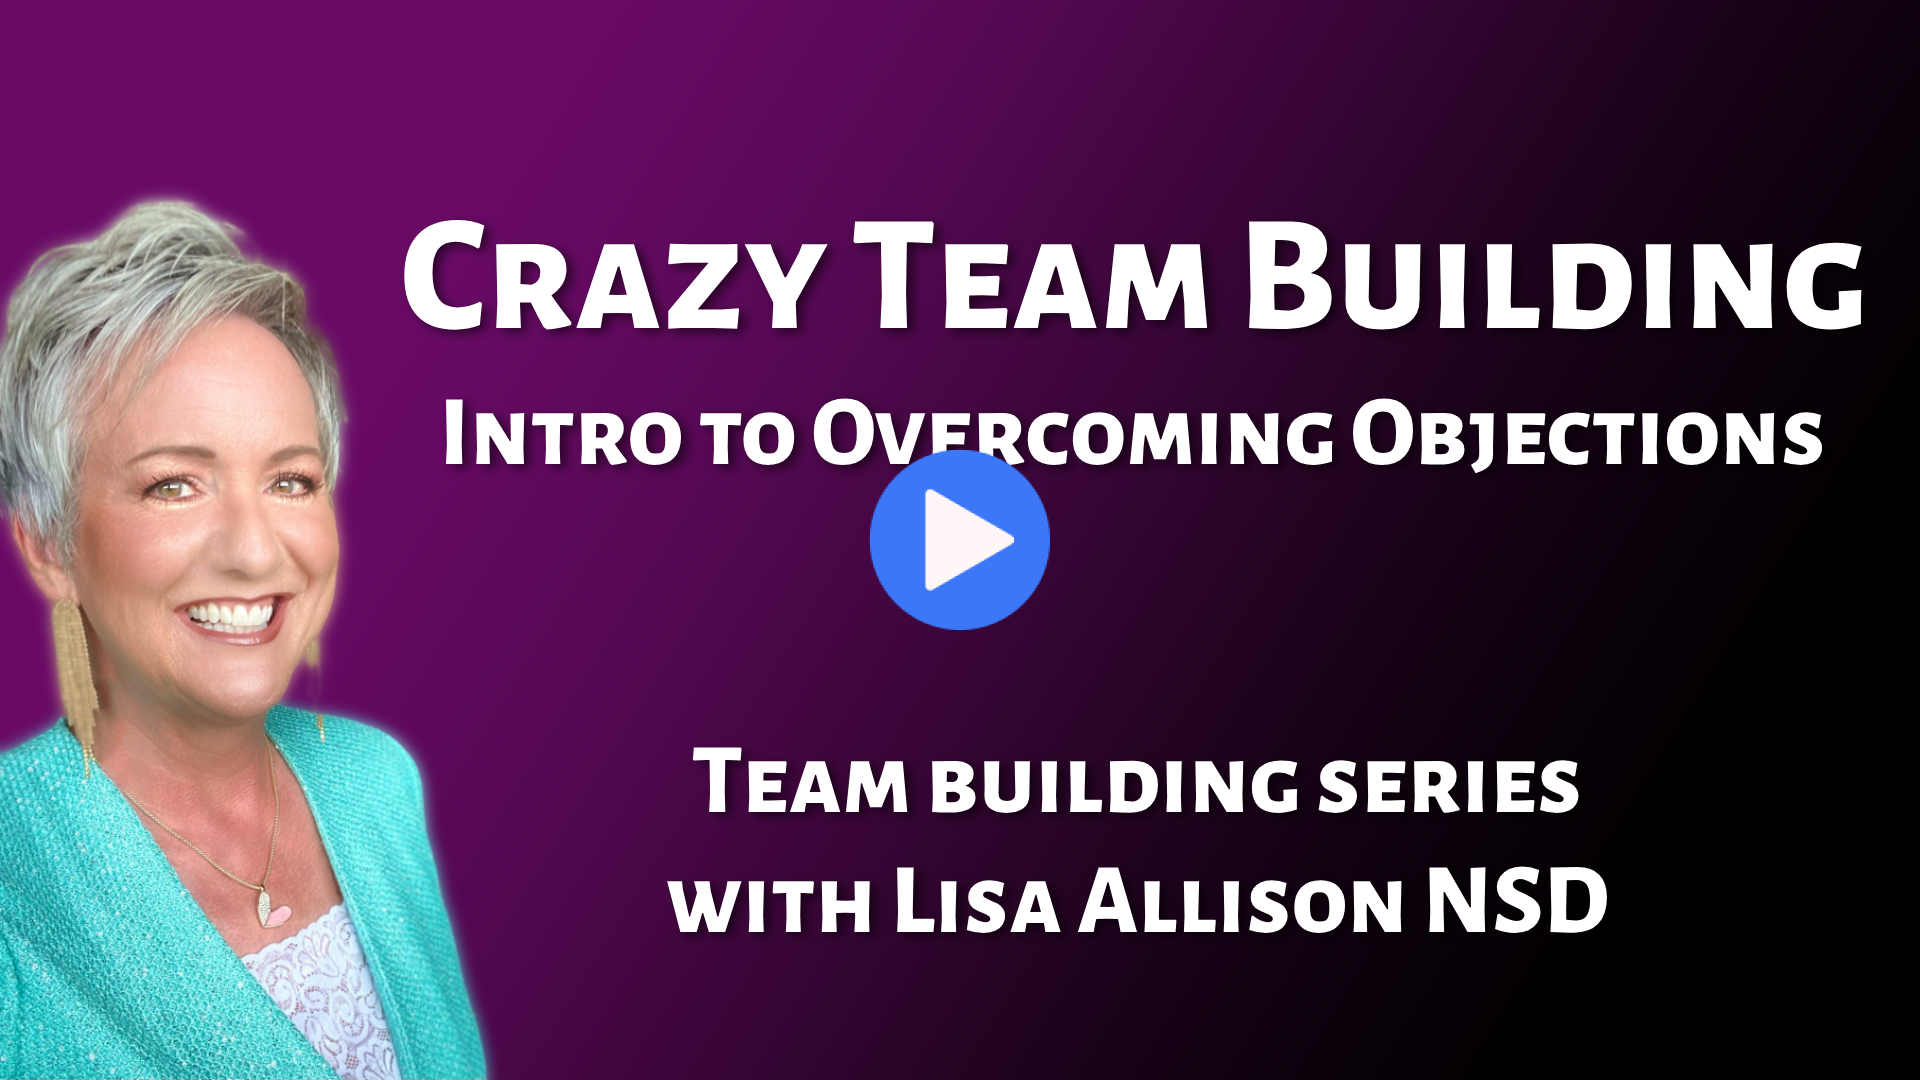 Crazy Team Building - Intro to Overcoming Objections.mp4